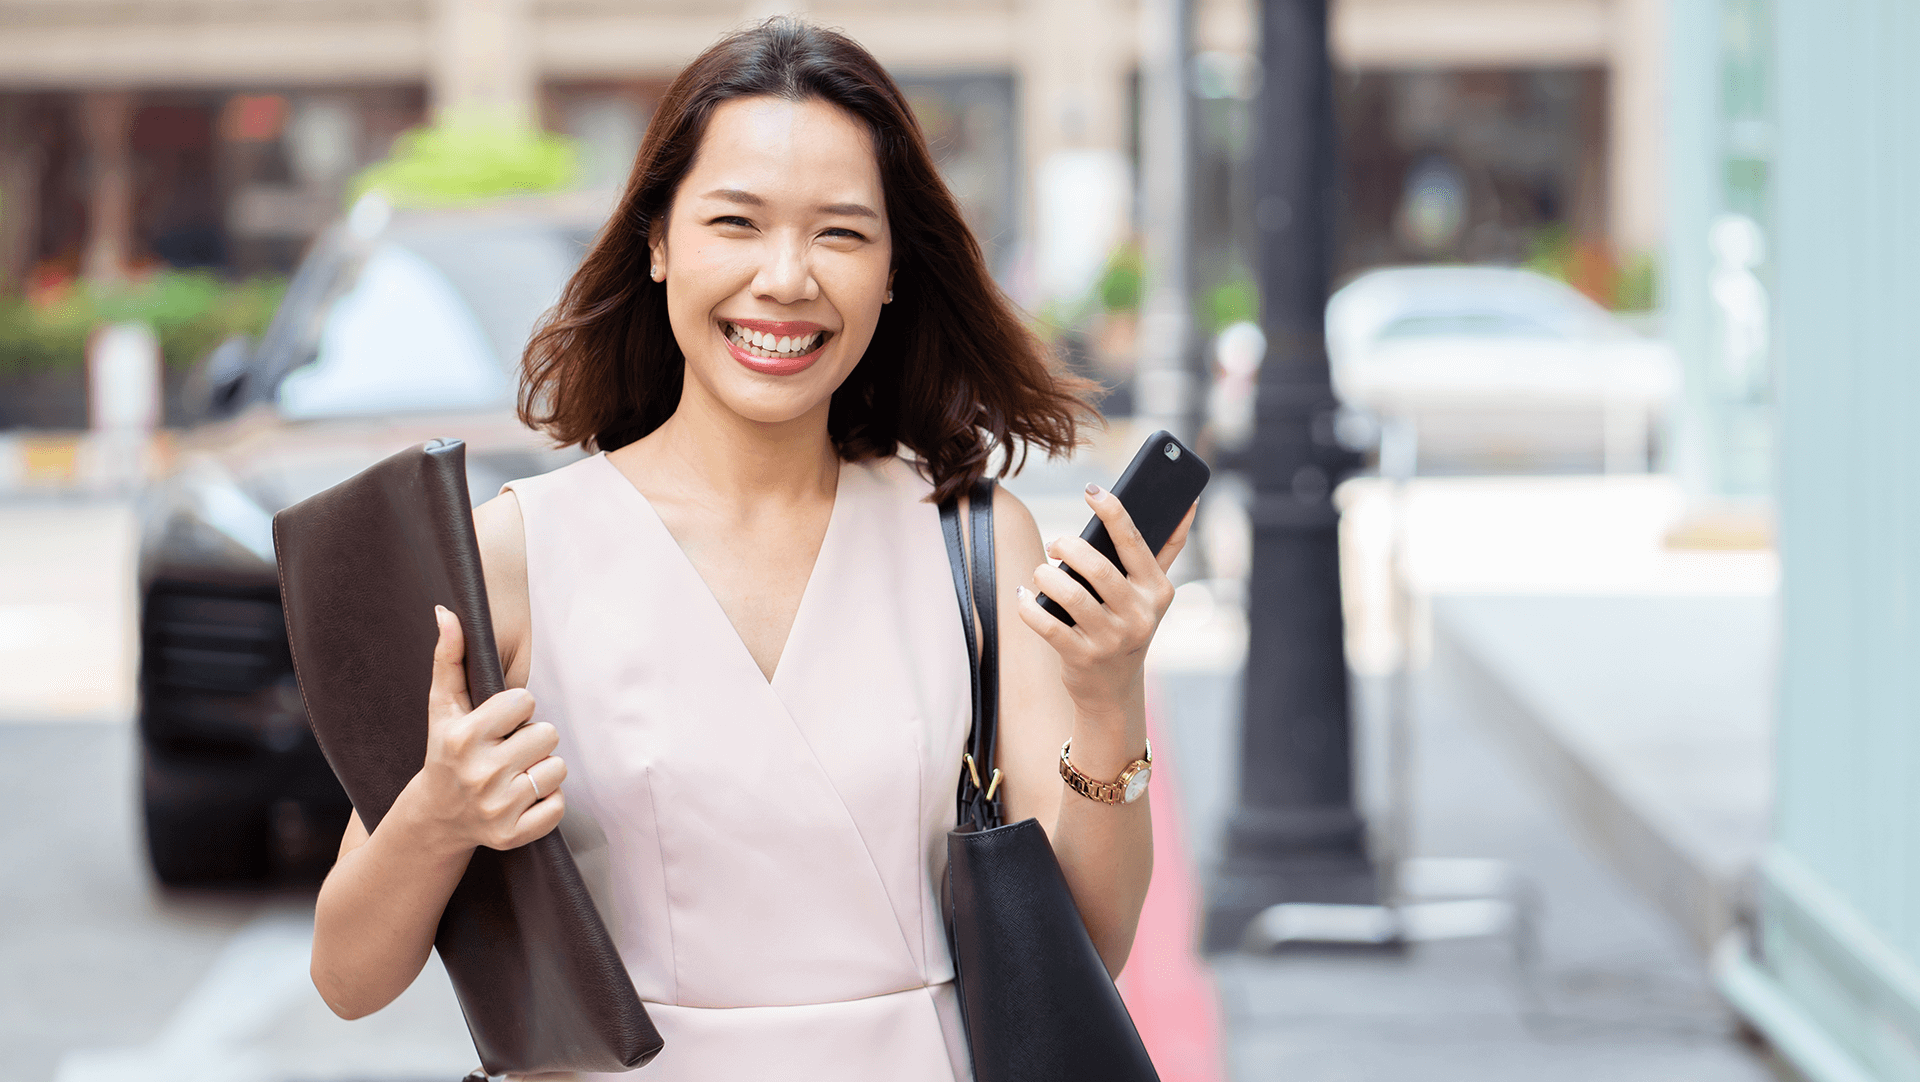 A cheerful woman in business casual attire holding a smartphone and a clutch, walking down the street.